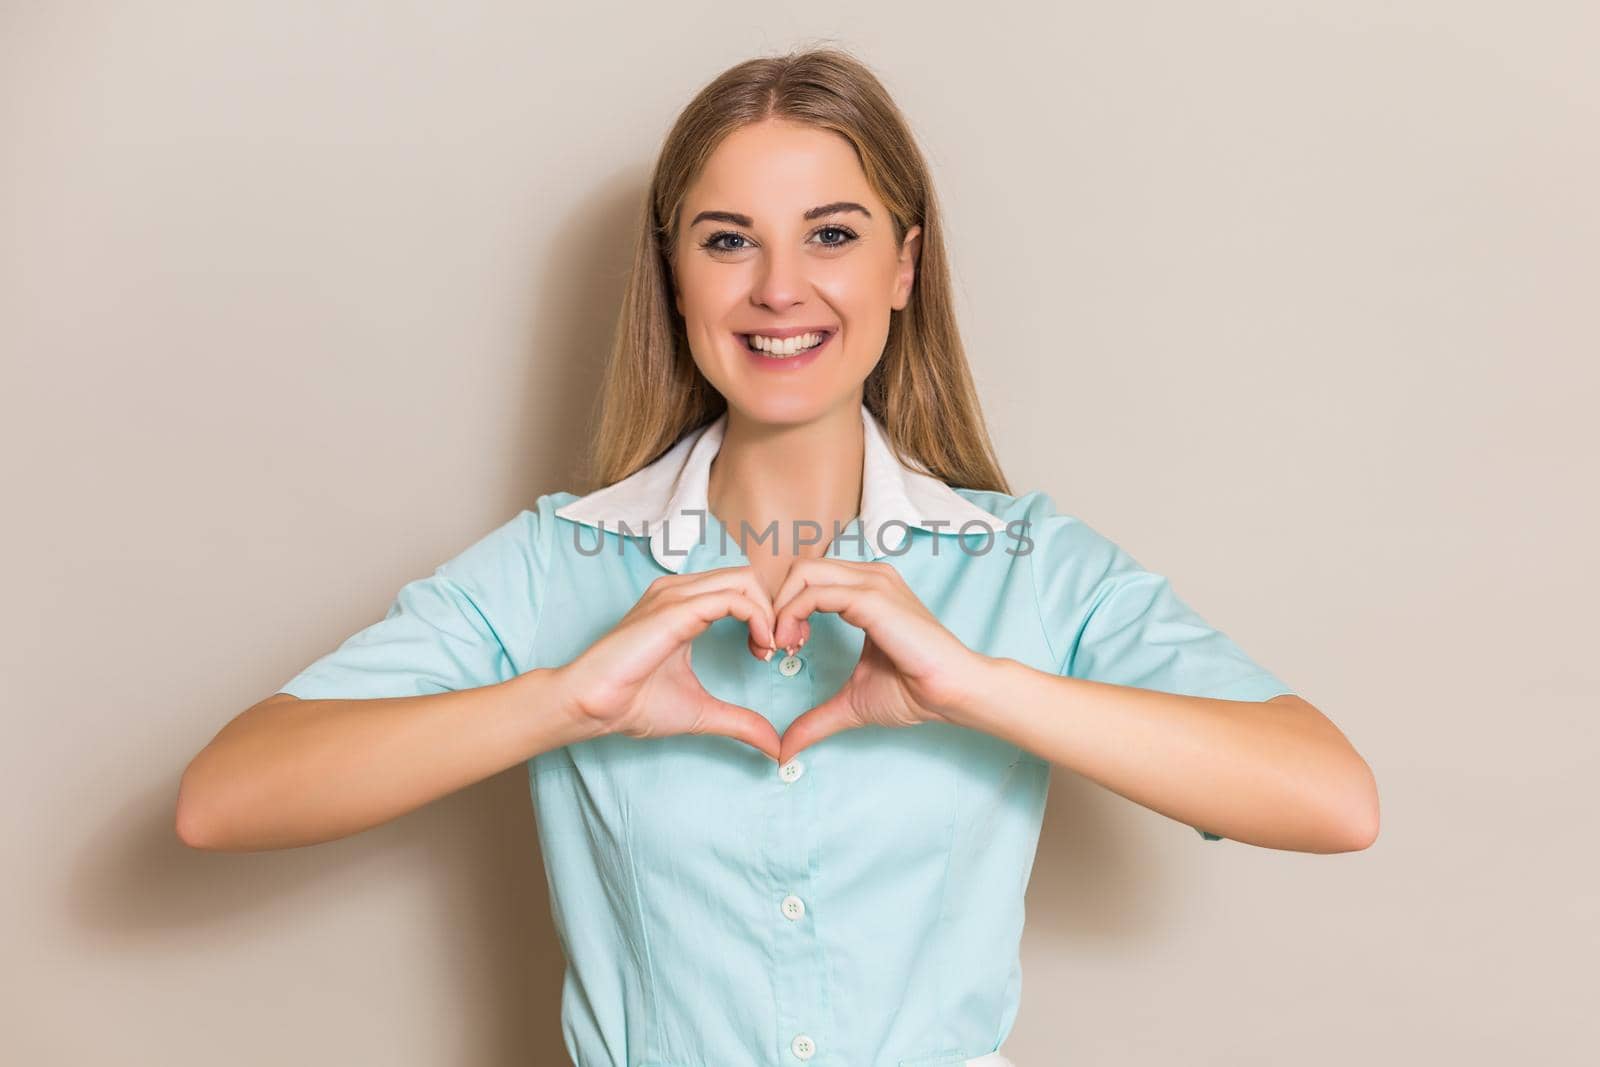 Portrait of medical nurse showing heart shape with hands.